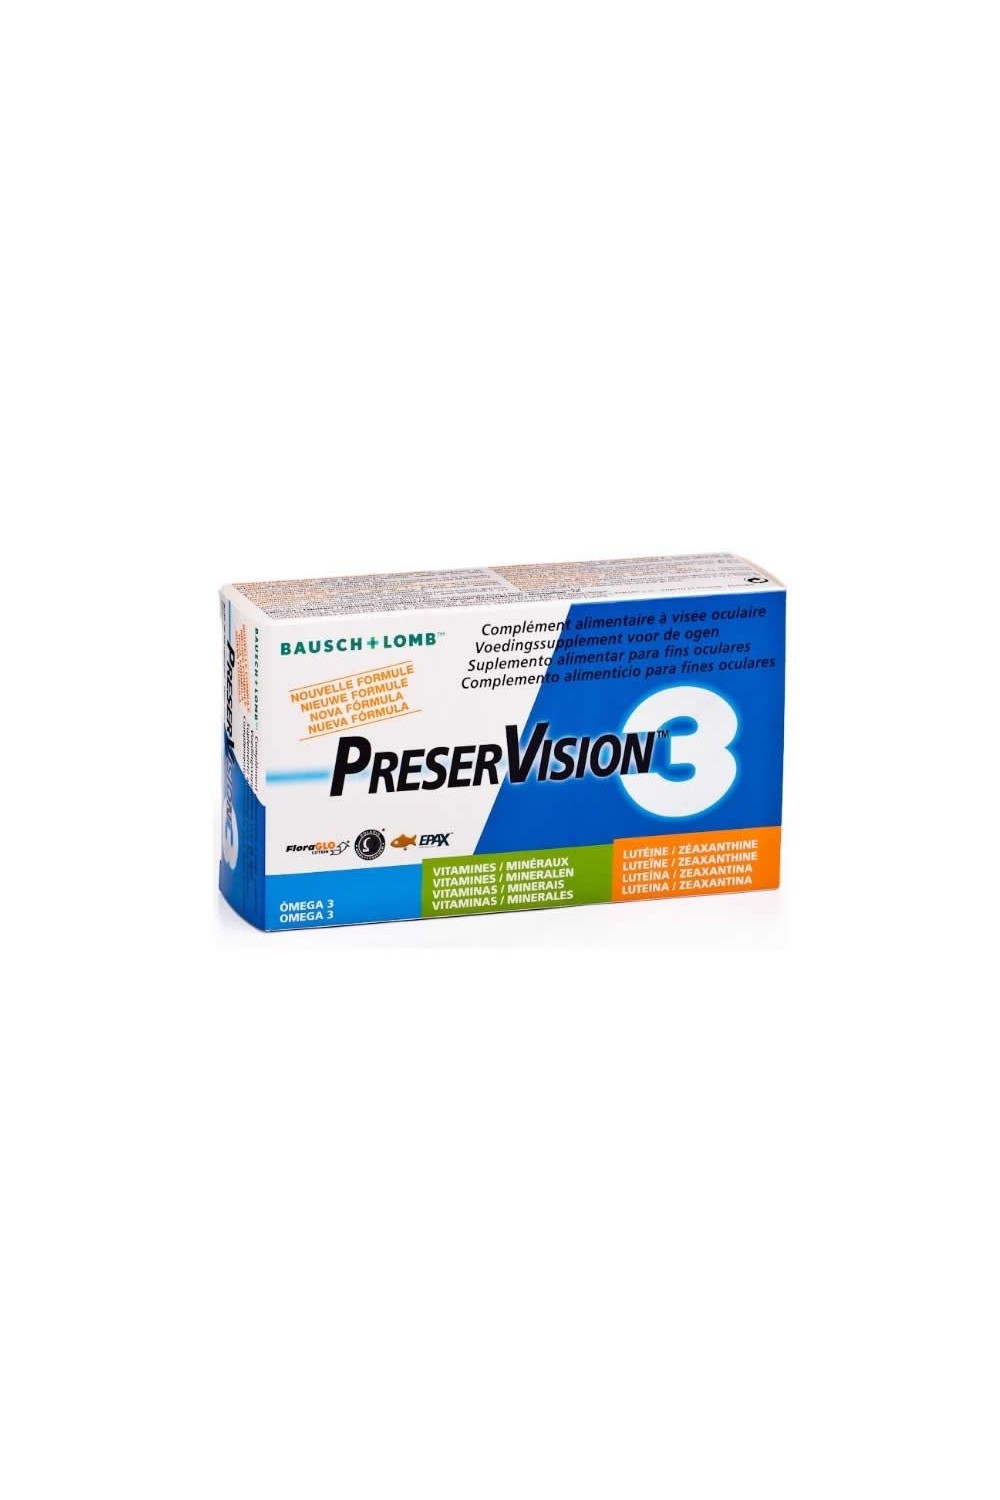 BAUSCH+LOMB - Preservision 3 60 Capsules